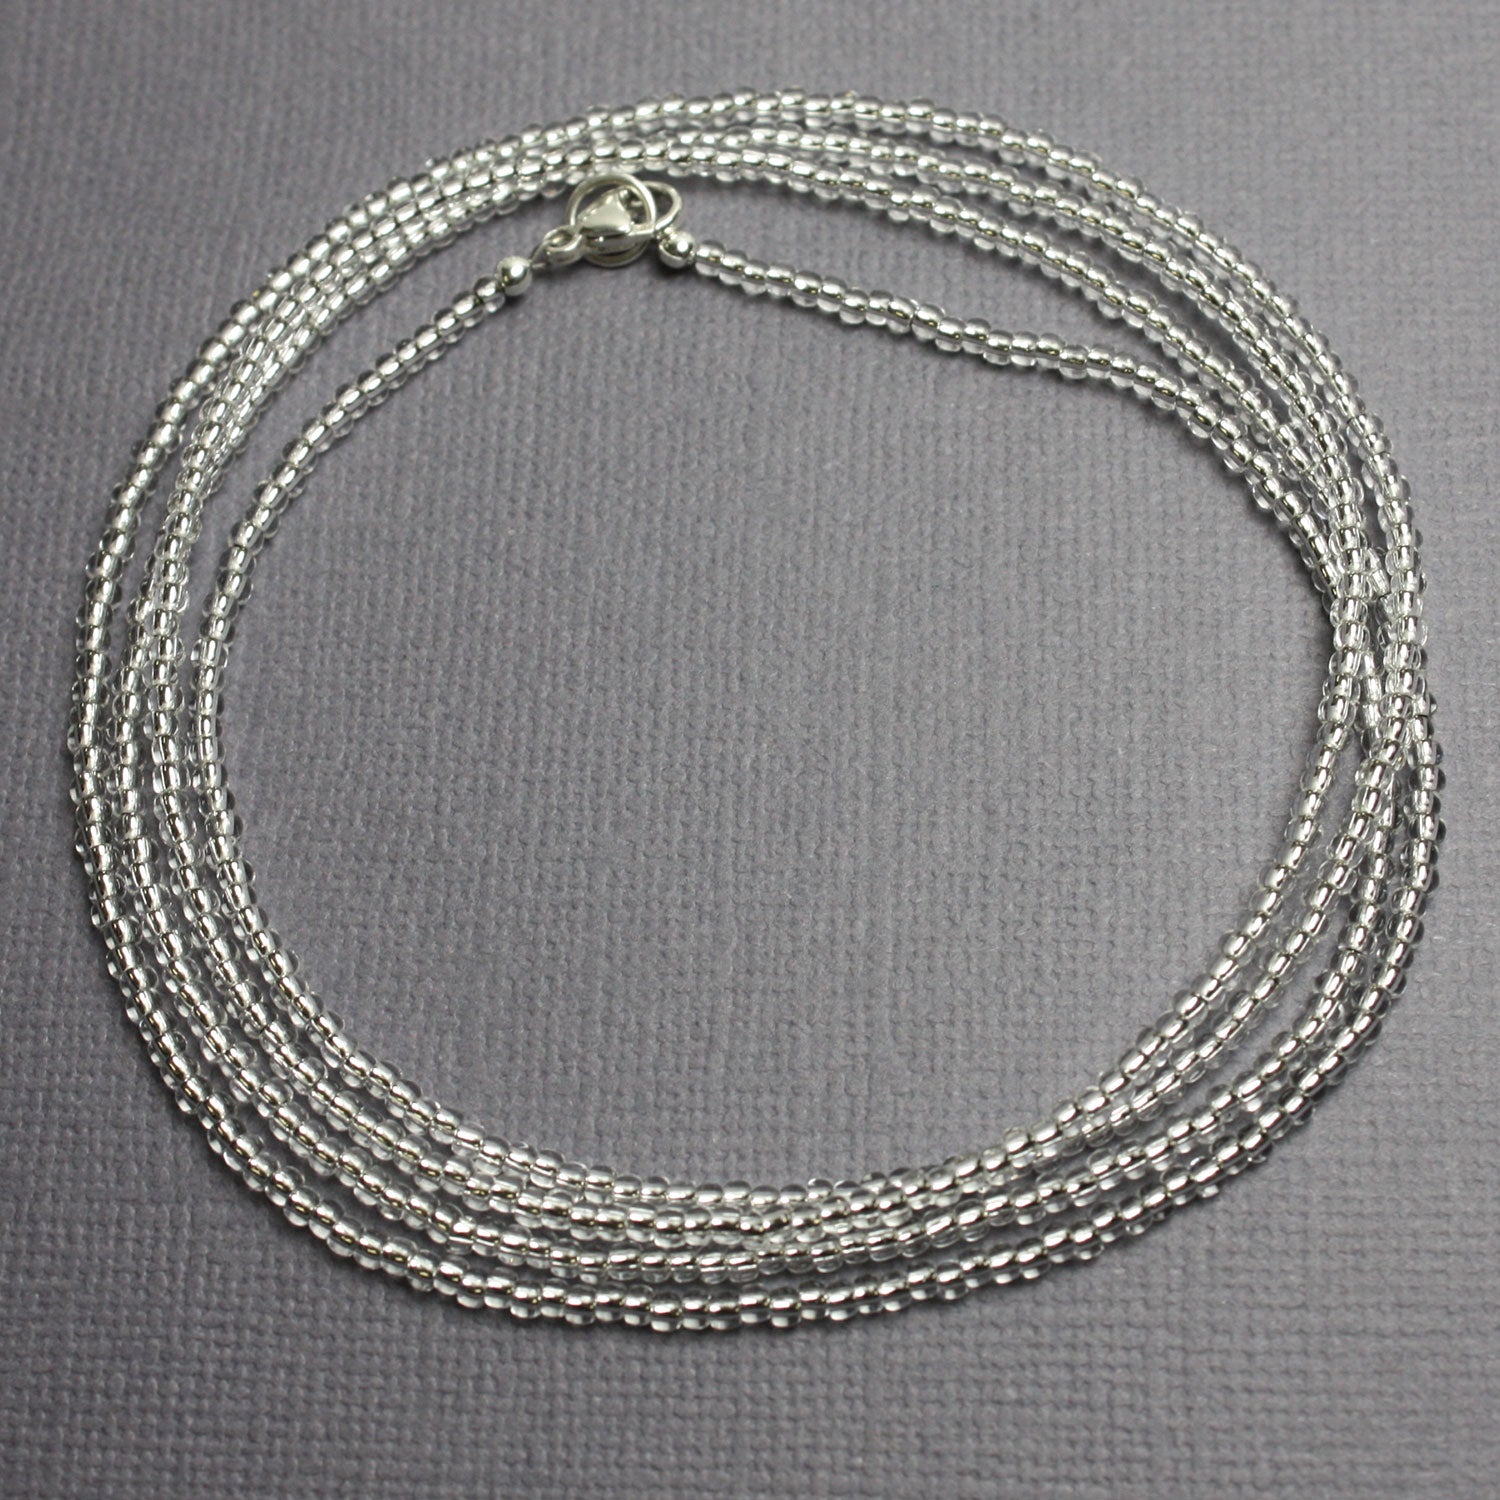 Silver Sparkle Seed Bead Necklace, Thin 1.5mm Single Strand – Kathy ...